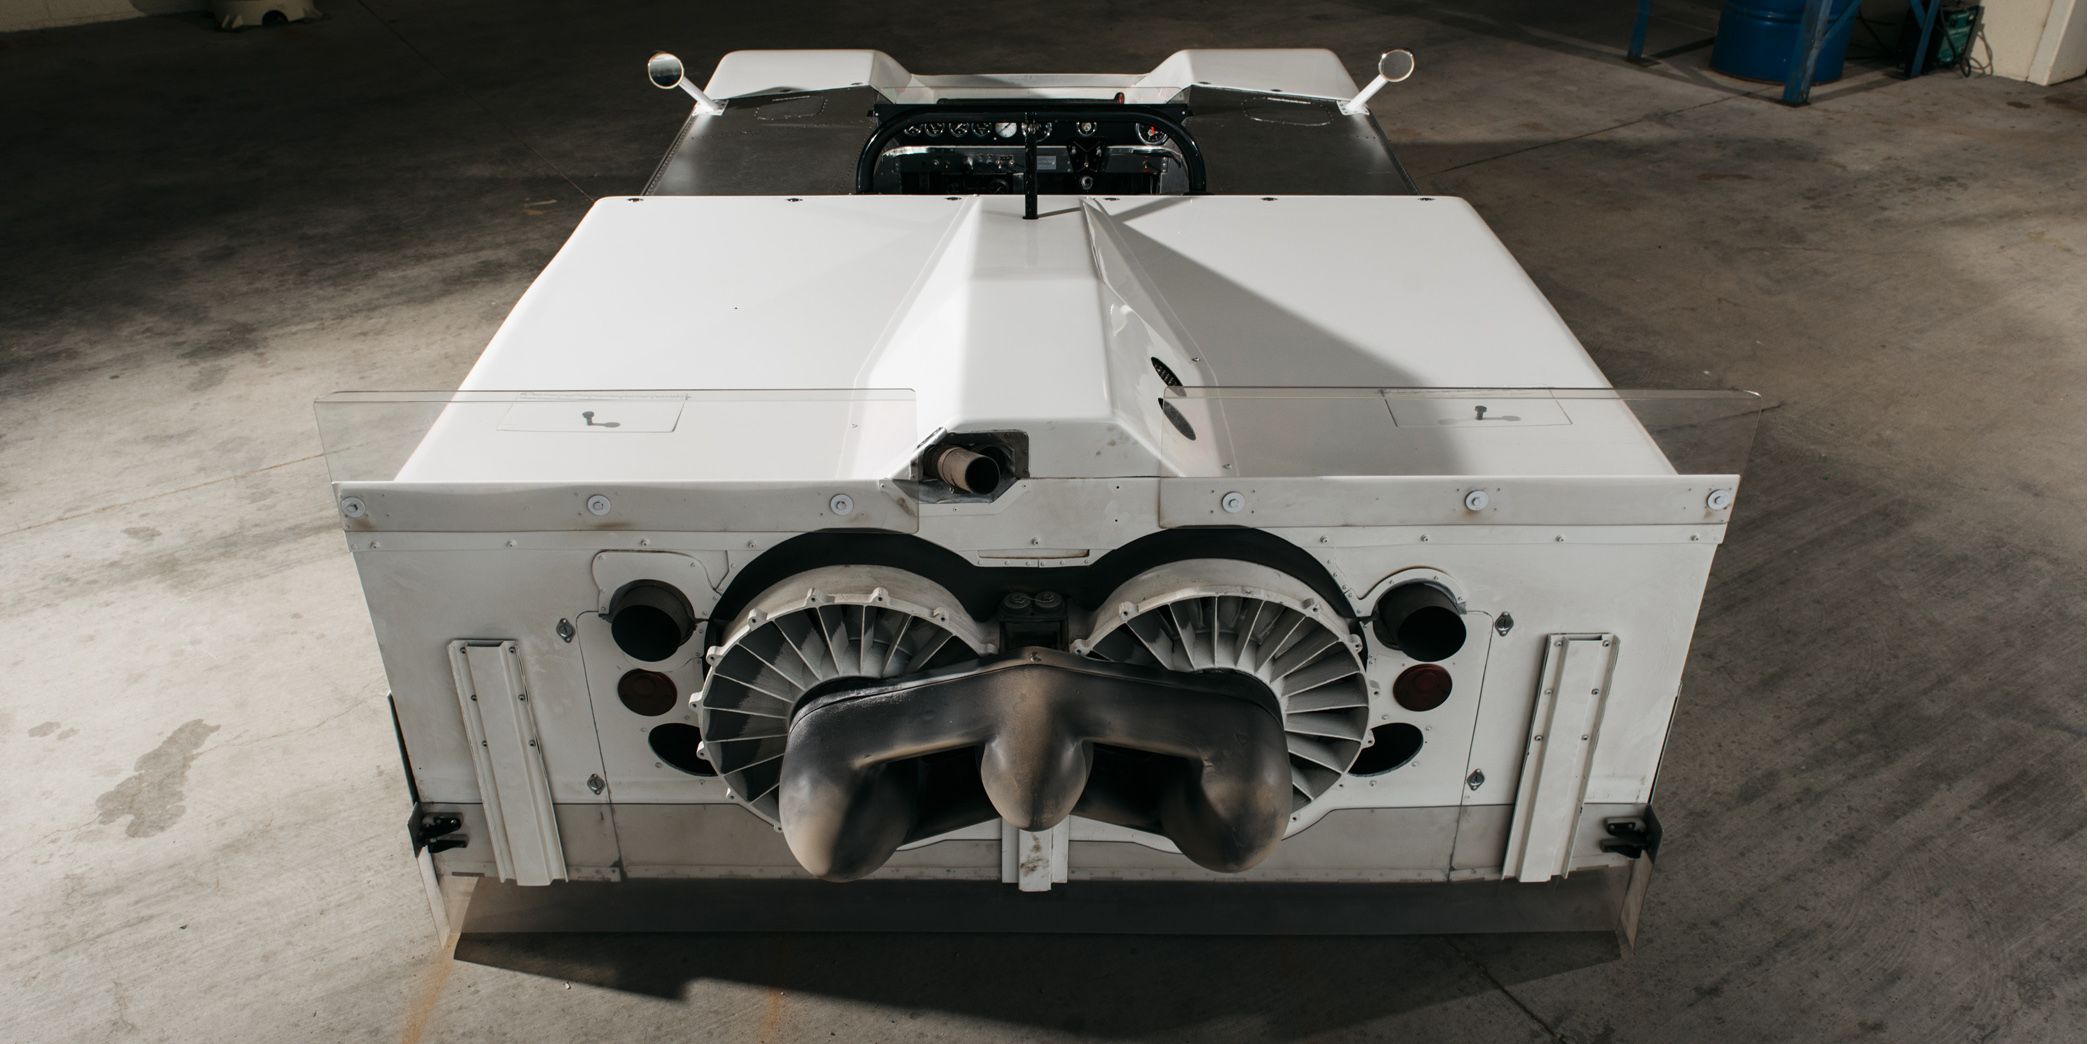 Jim Hall and the Chaparral 2J: The Story of America's Most Extreme